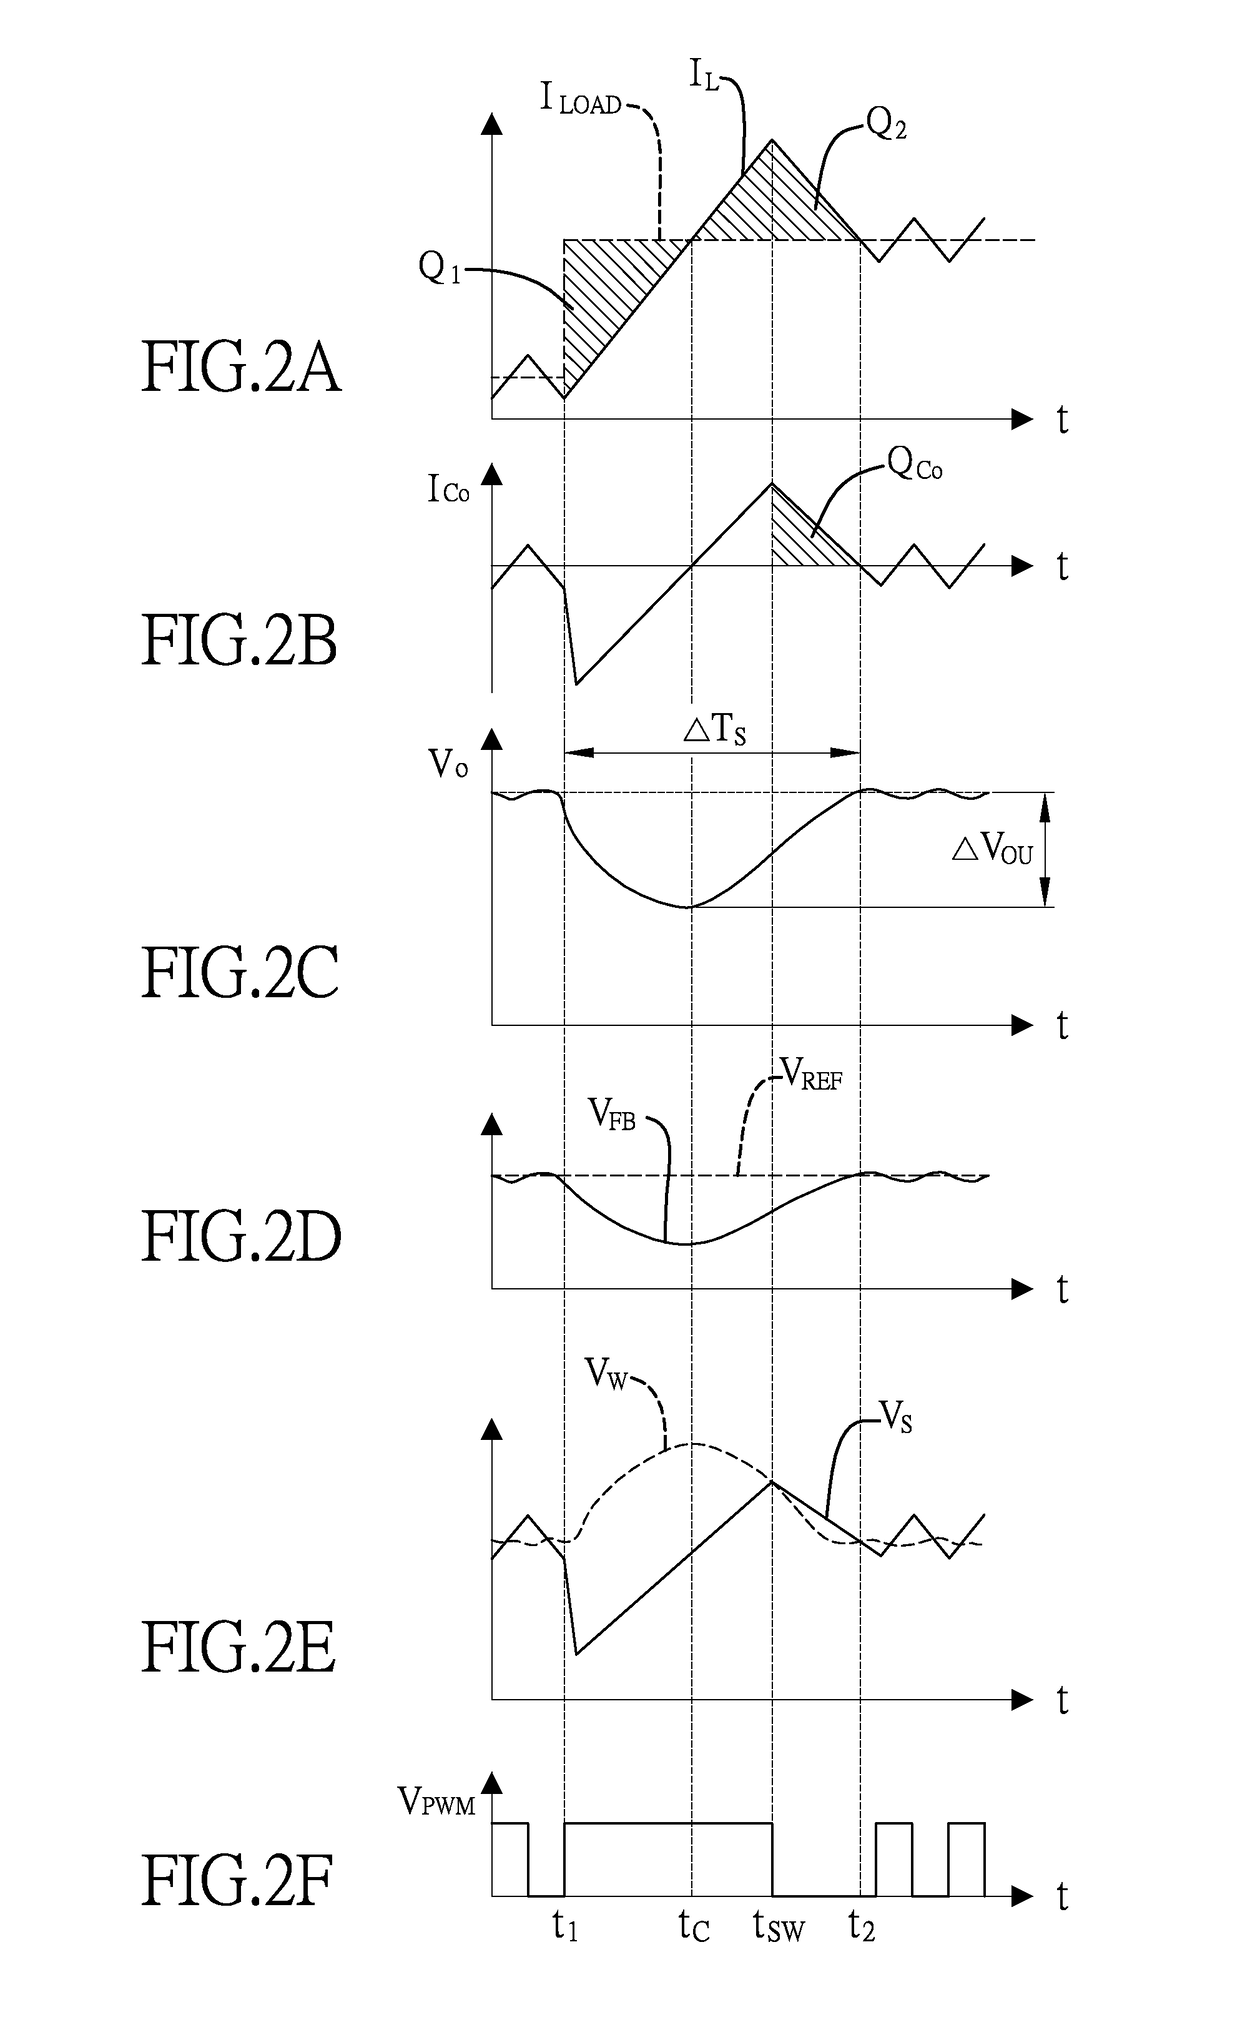 Buck converter with a variable-gain feedback circuit for transient responses optimization